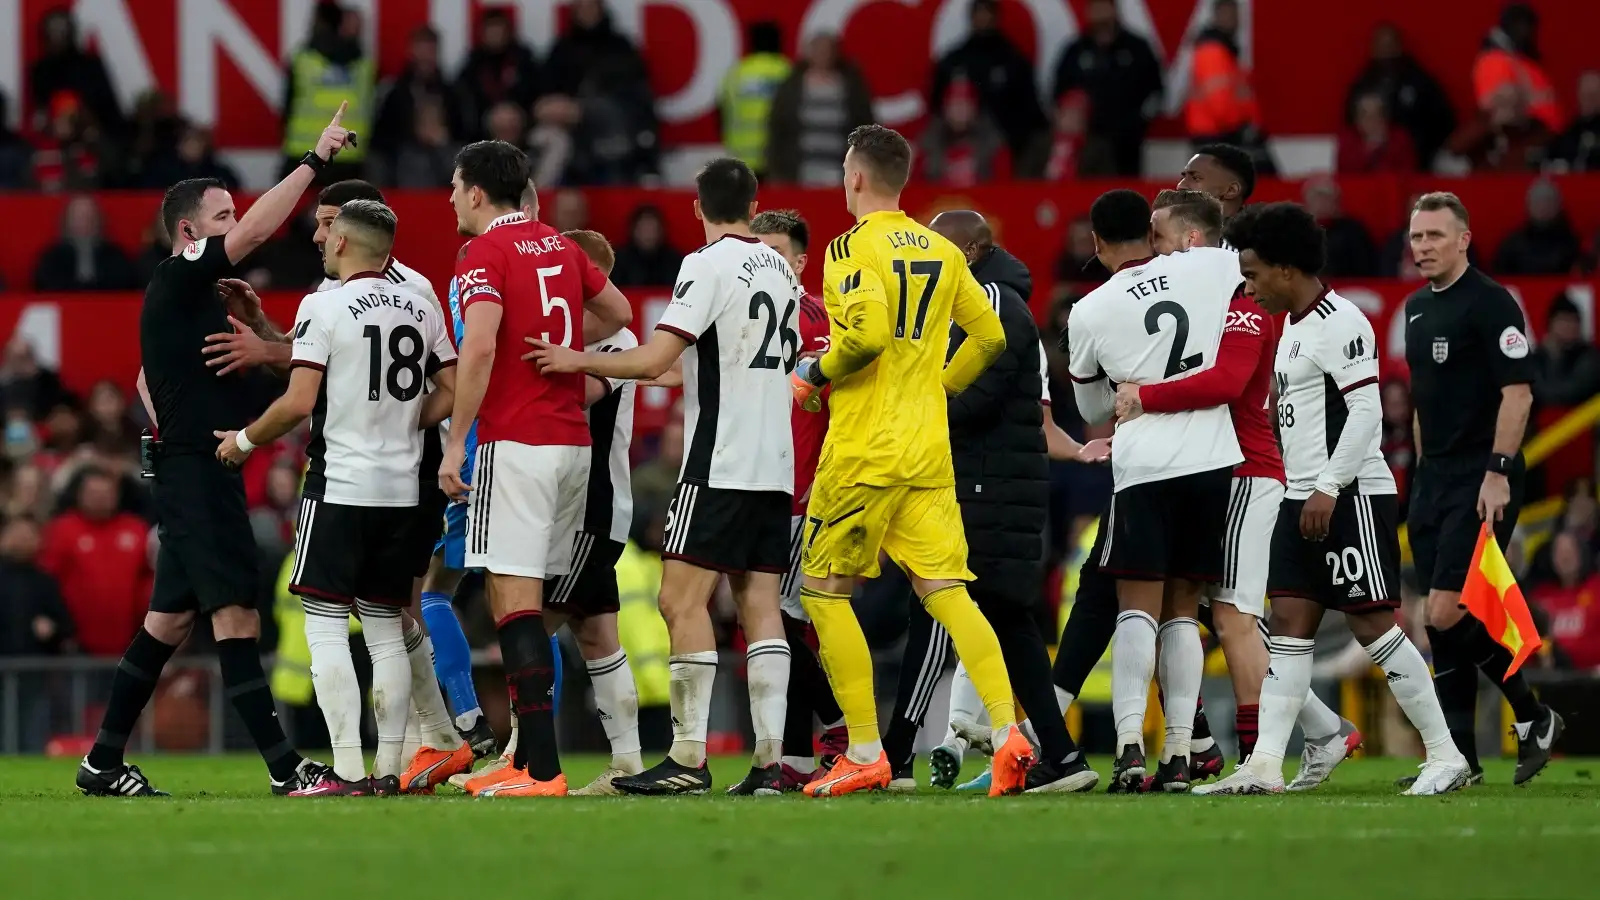 Man Utd breaking Fulham’s brains is just the latest evidence they’re back